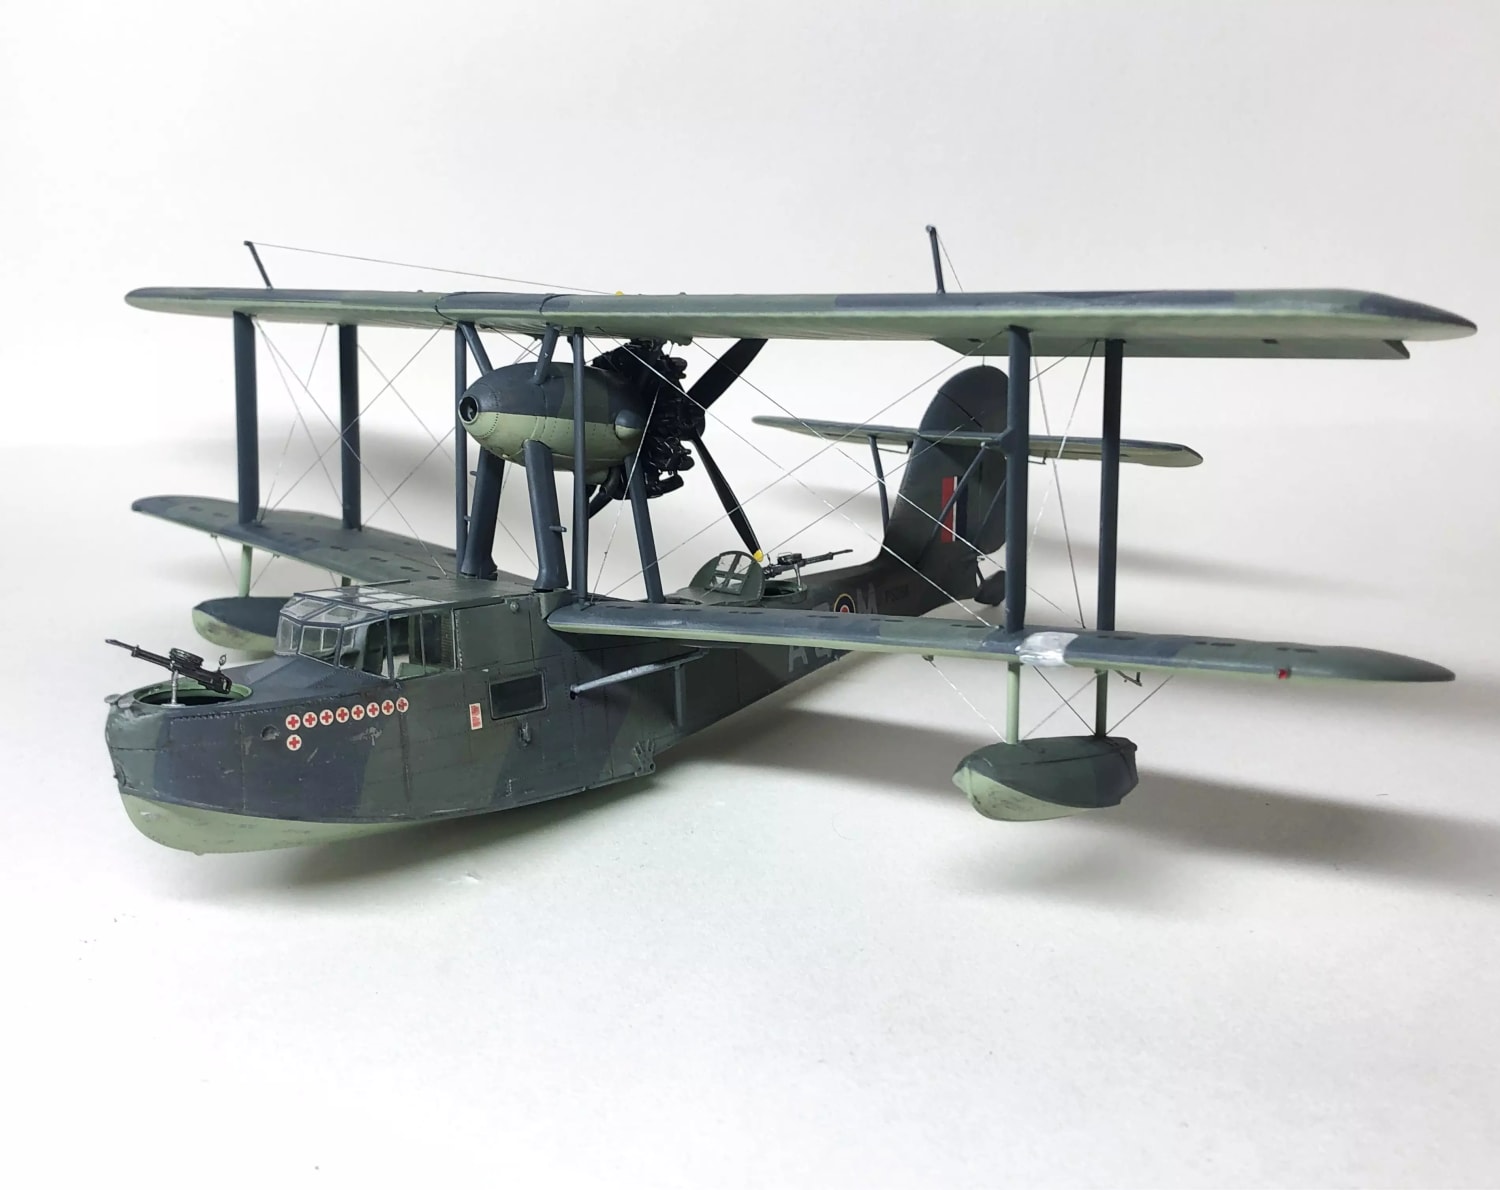 Delayed by returning to the office but finished my 1/48 Airfix Supermarine Walrus. Final plan is to mount it on a seascape during landing, watch this space... more details and photos below